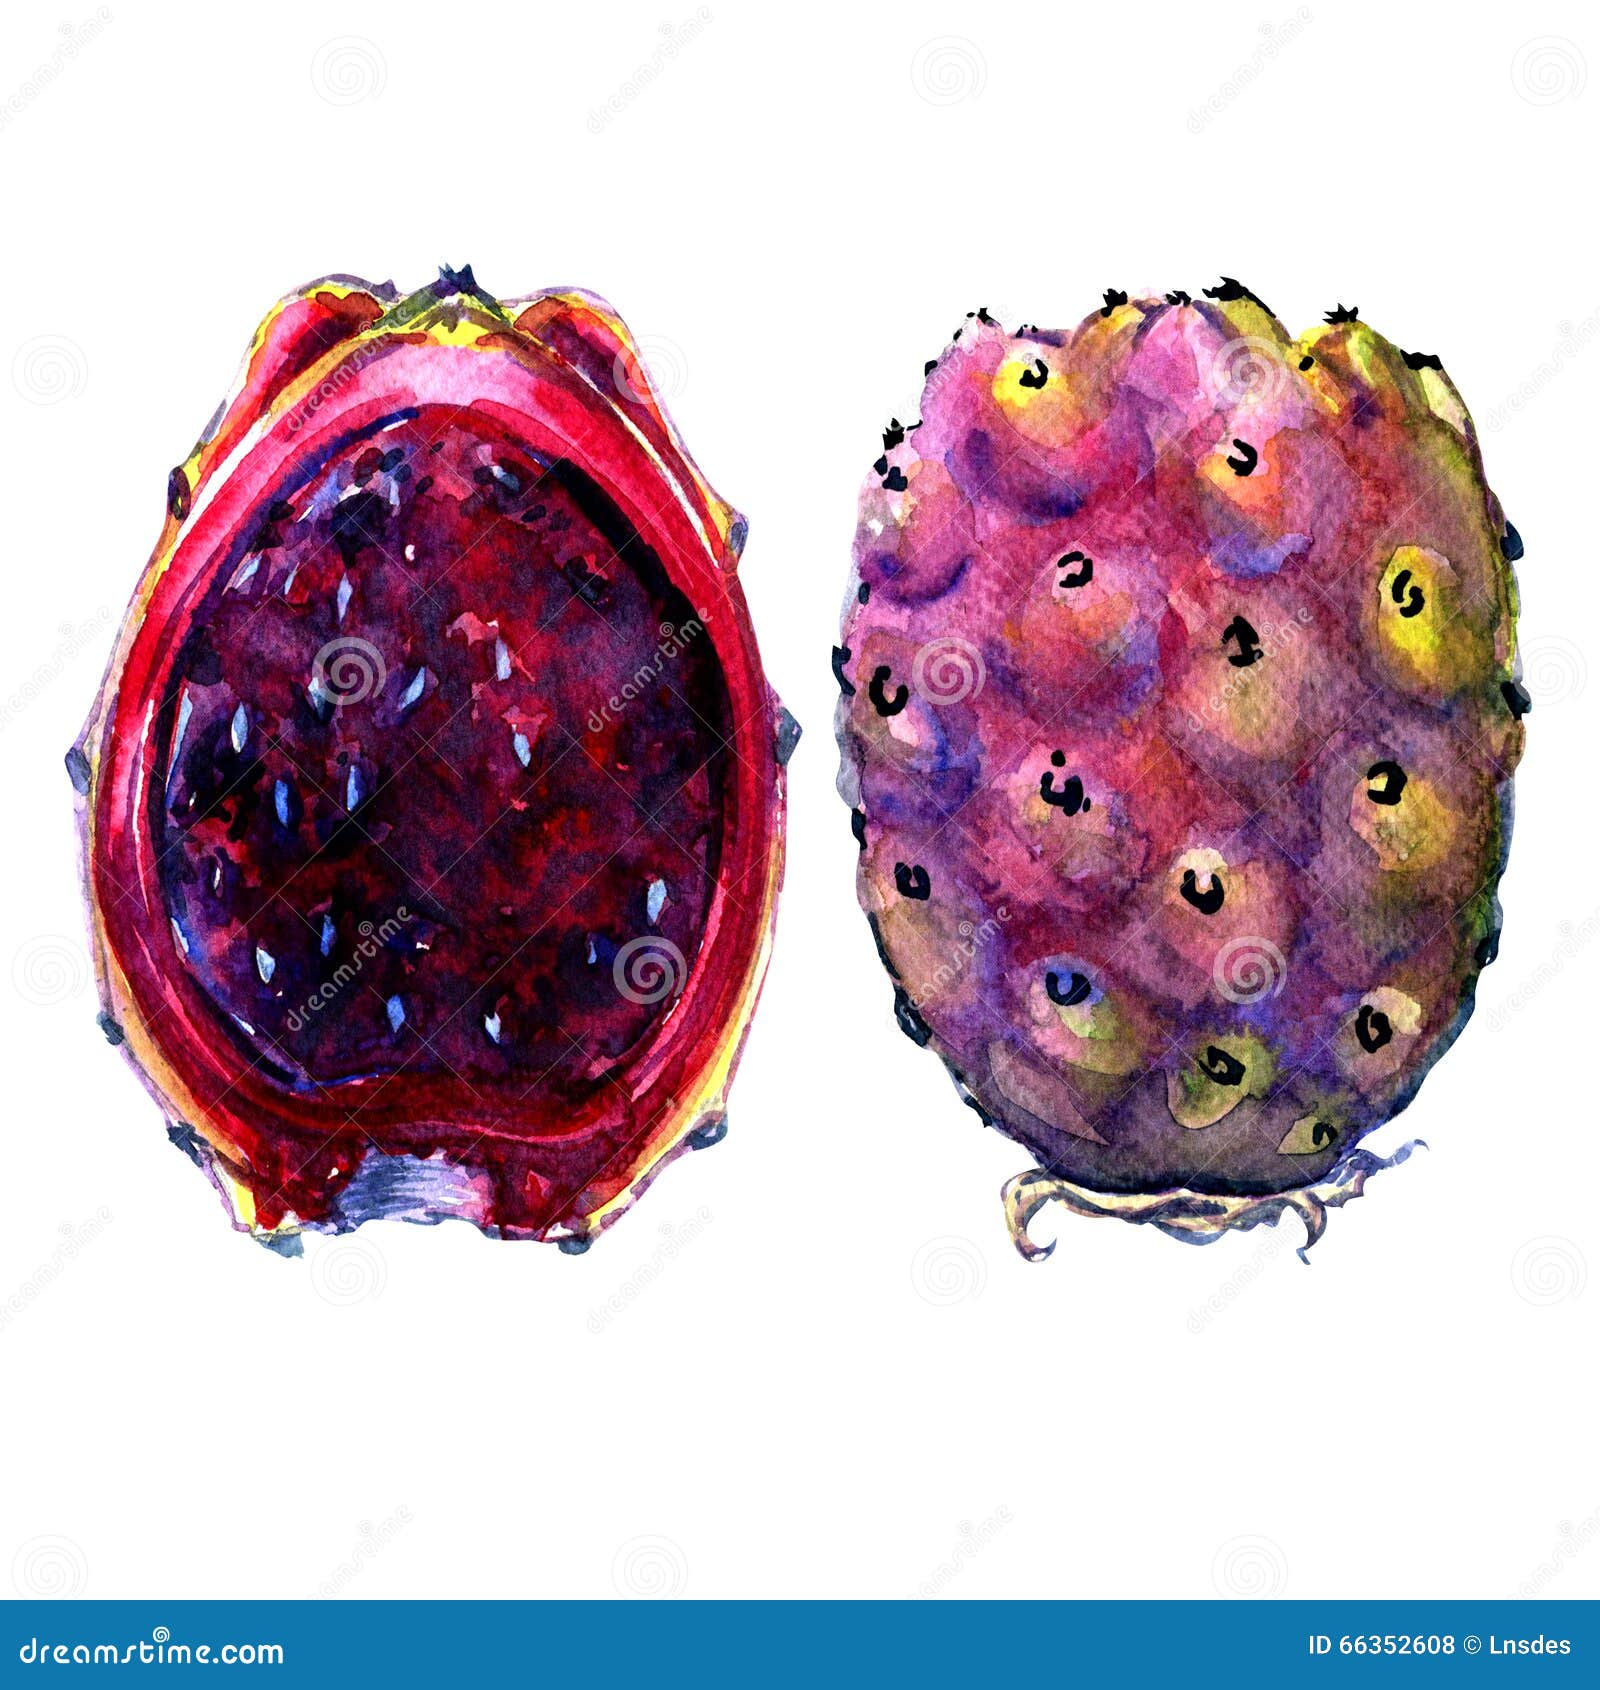 fruits of opuntia ficus-indica, red cactus pears on white